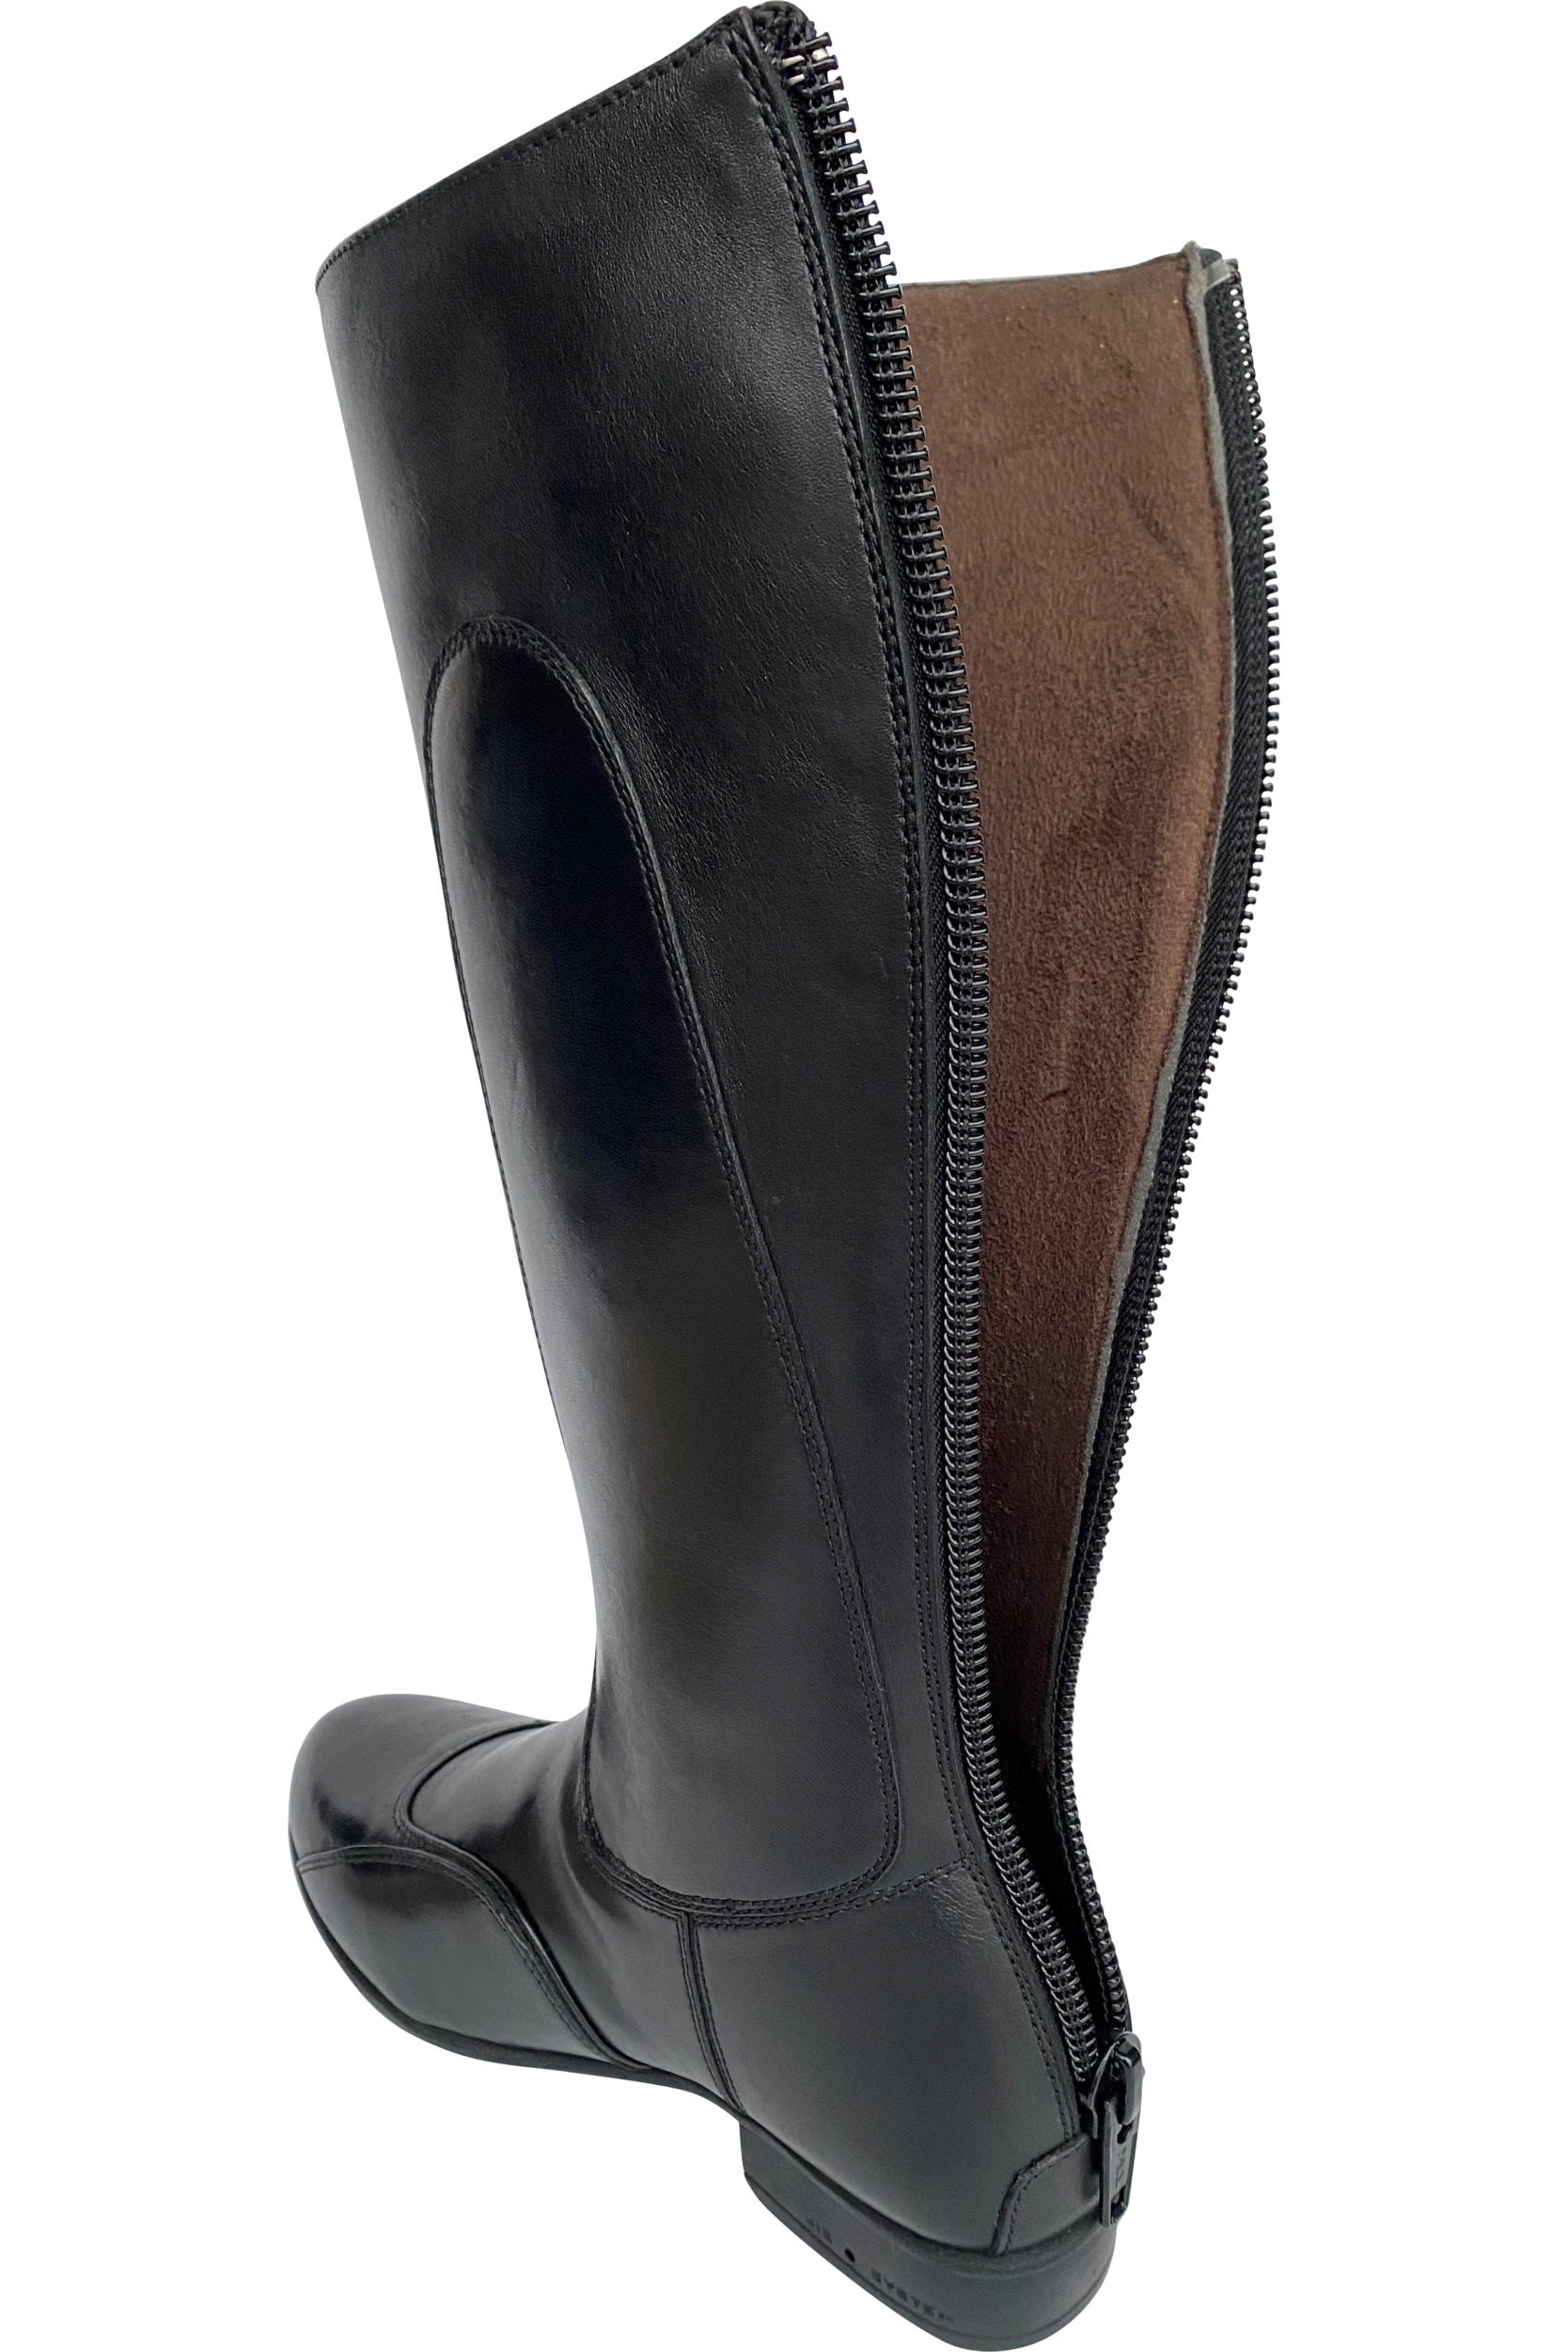 Breeze Up Eclipse Leather Exercise Boot 10/44 Reg